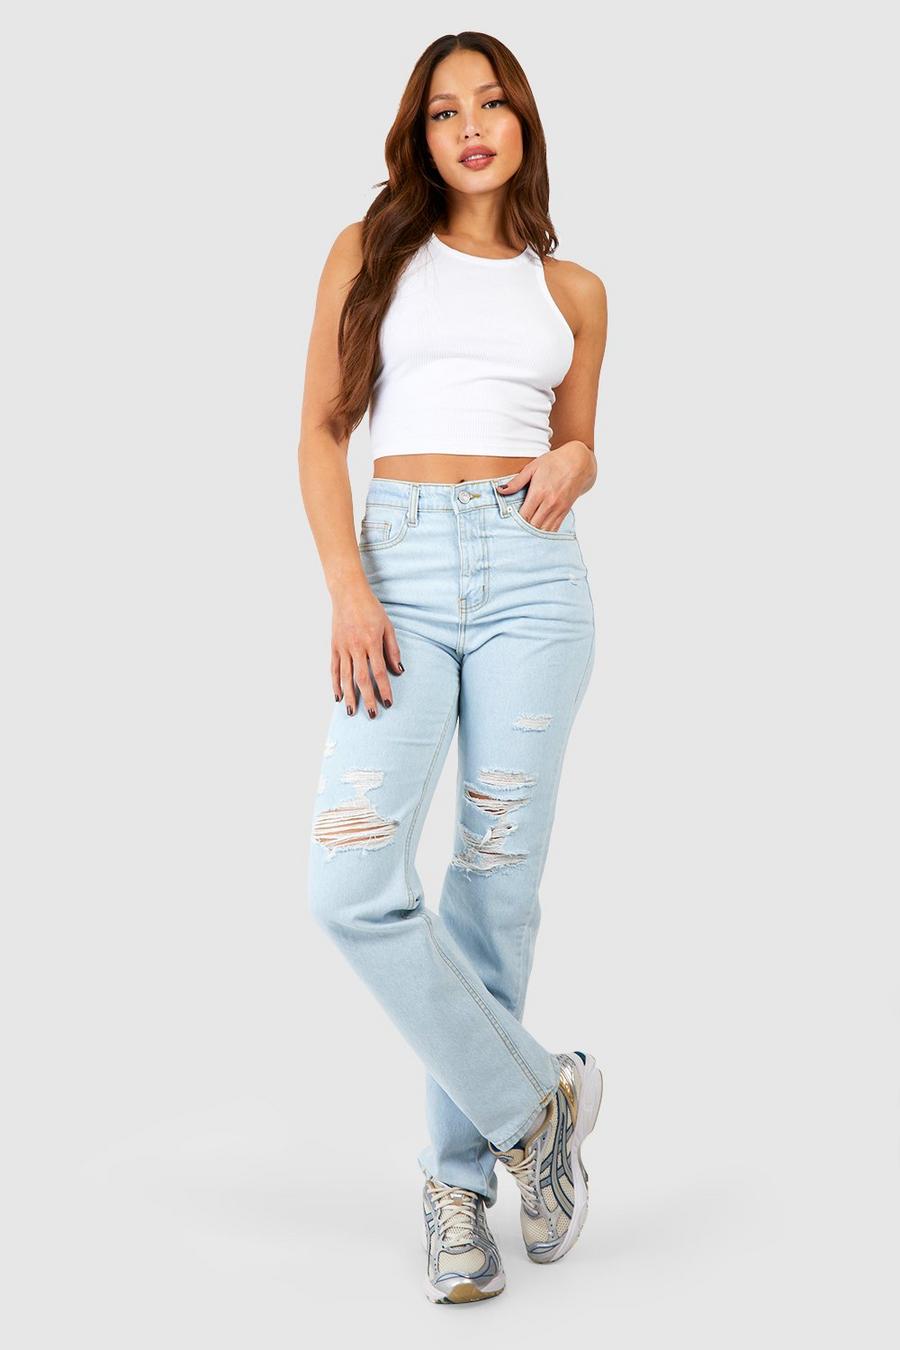 Trendy Jeans for Tall Girls